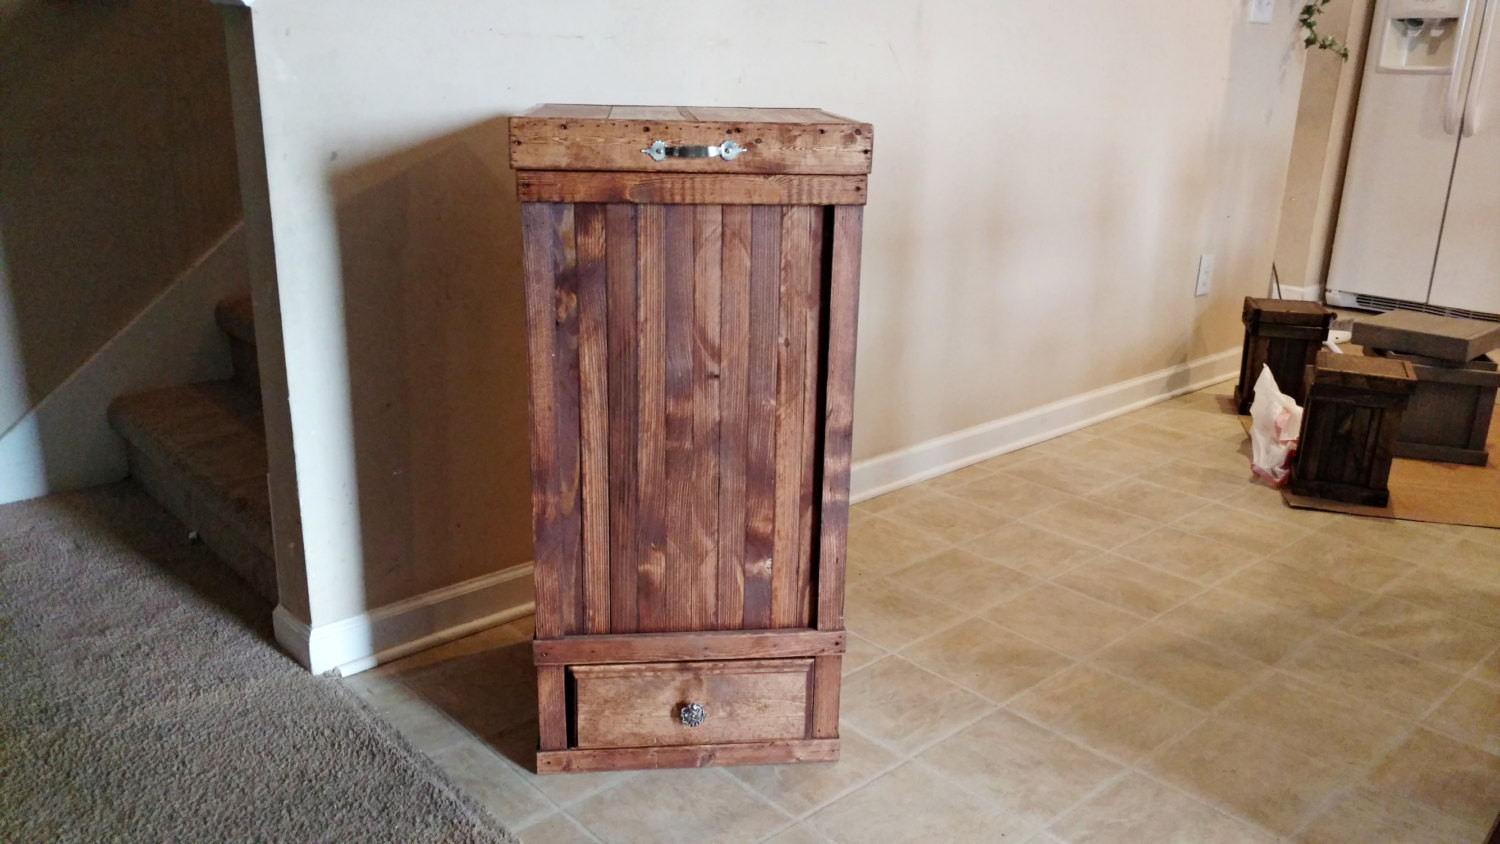 Rustic Kitchen Trash Can Inspirational Rustic Kitchen Trash Can 30 Gallon Trash Can Trash Can with